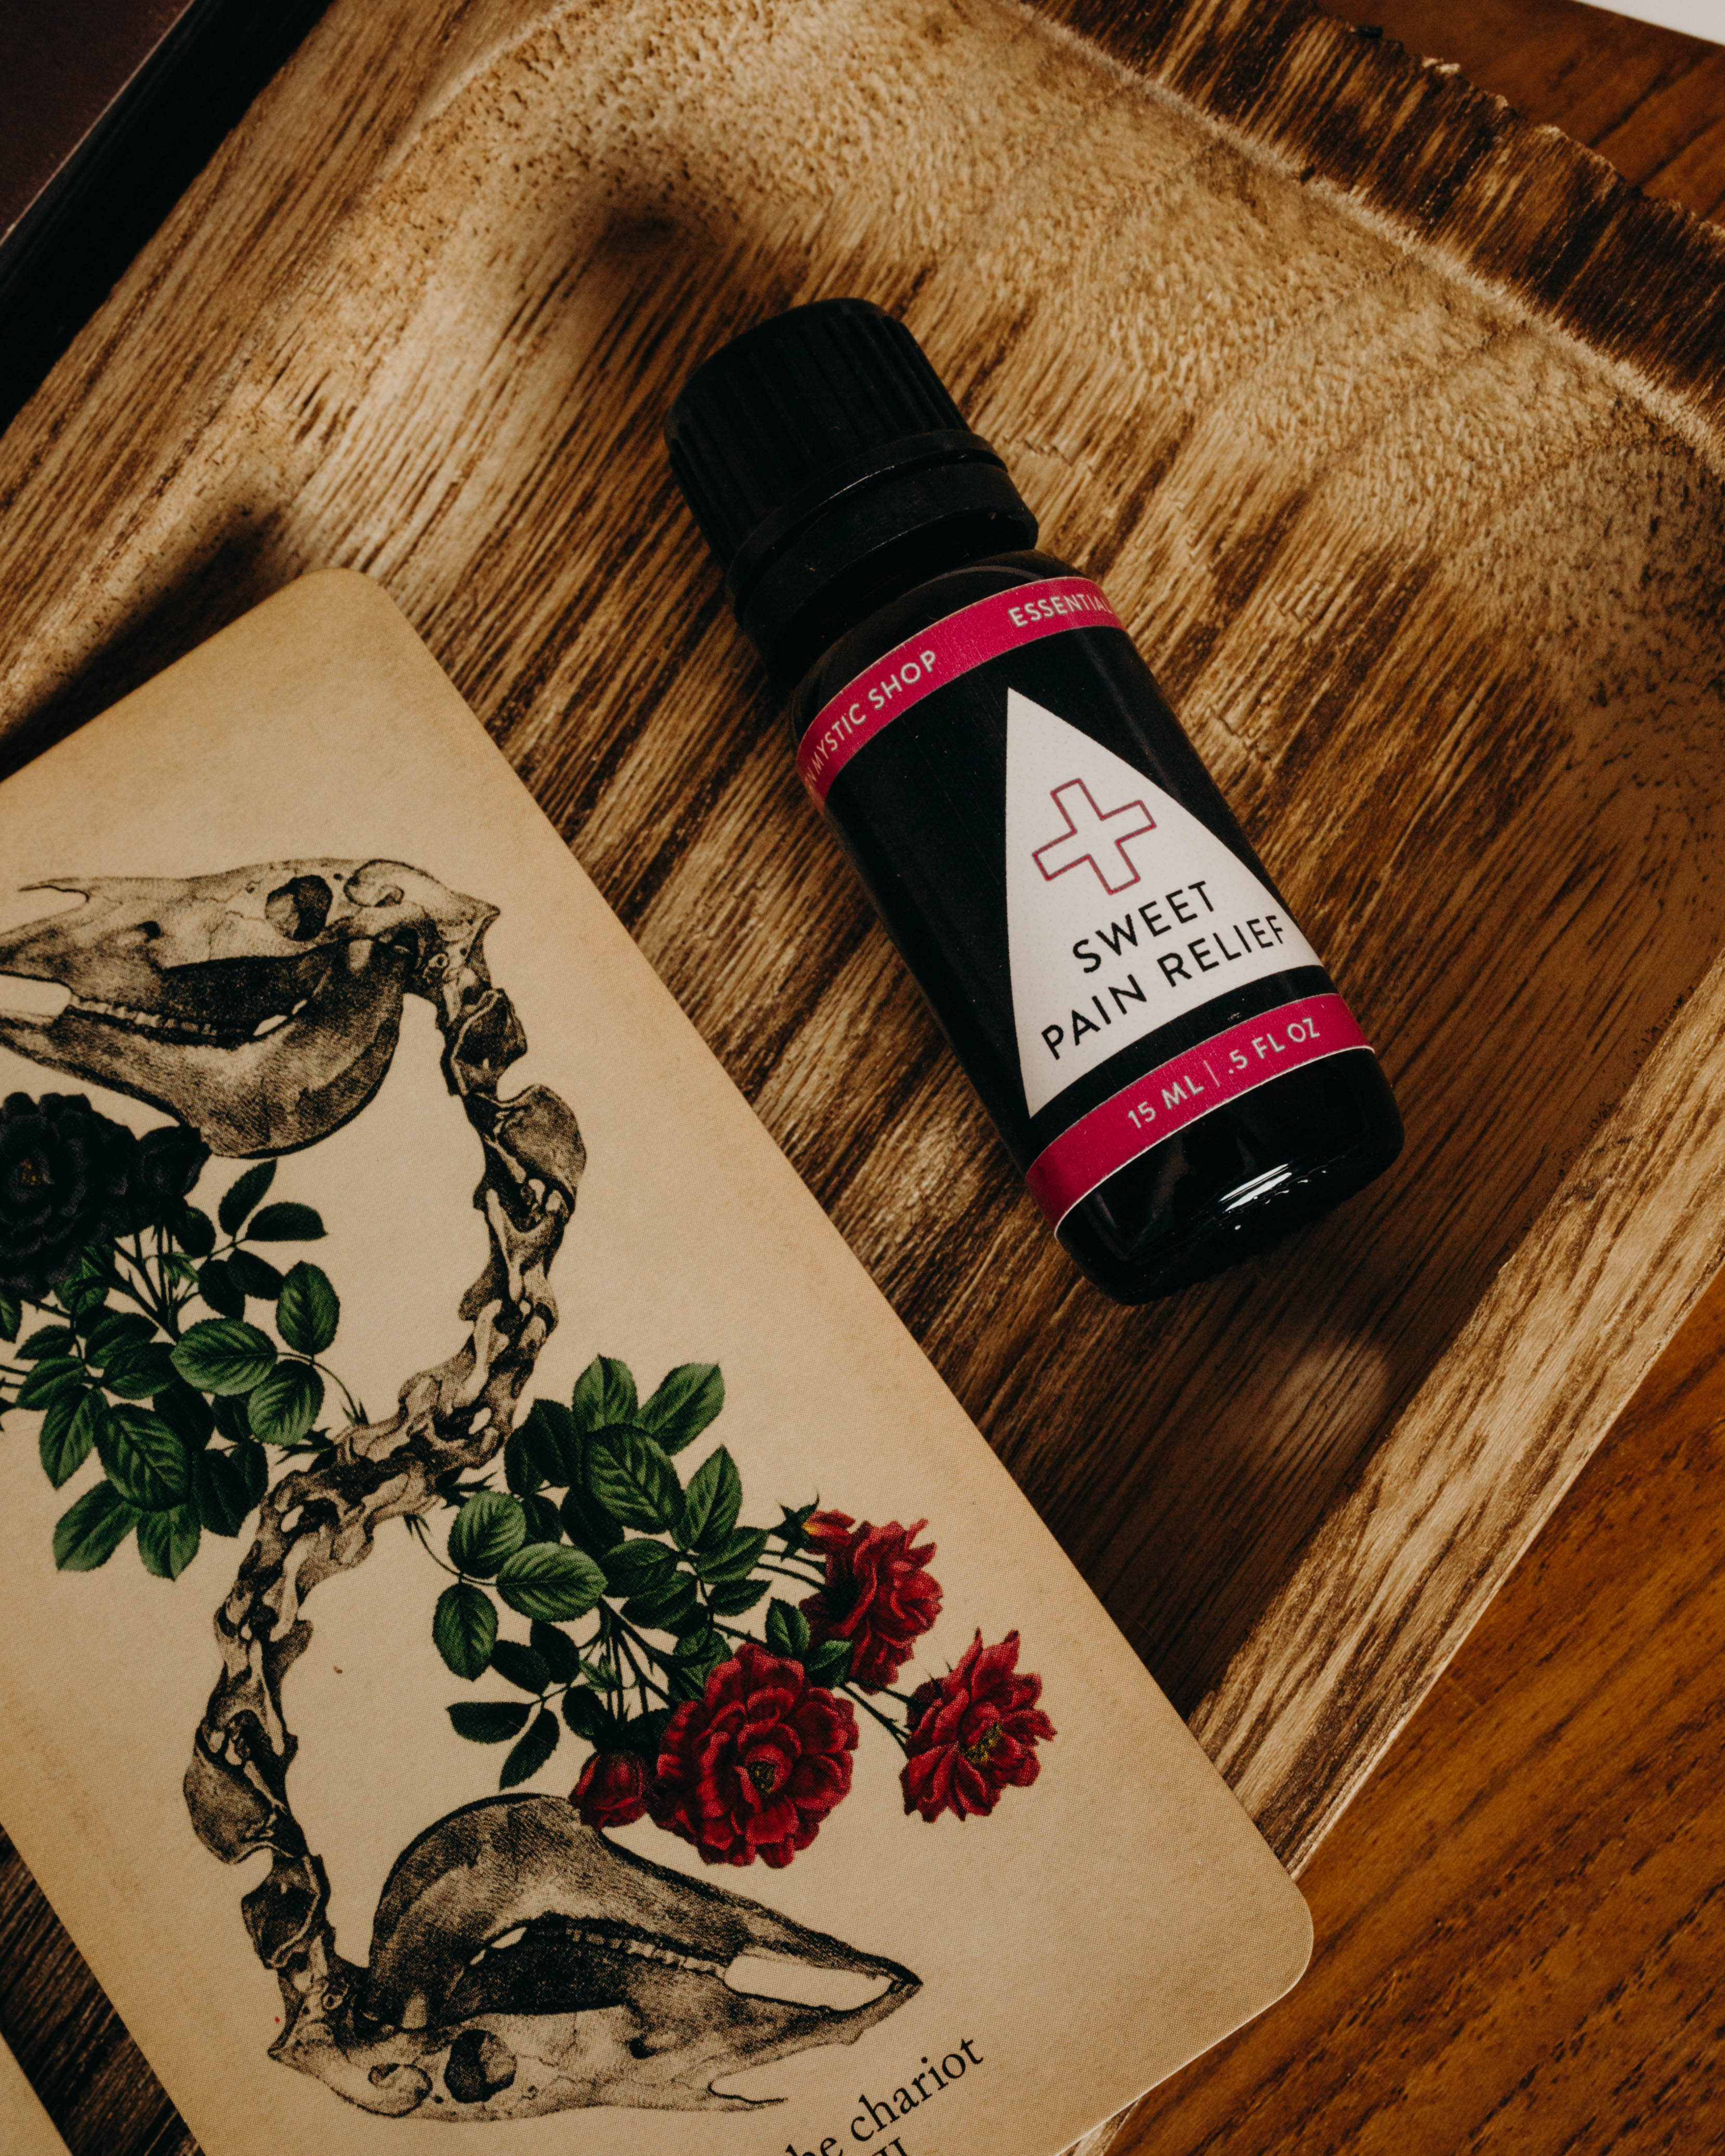 Sweet (Pain) Relief Essential Oil - Modern Mystic Shop